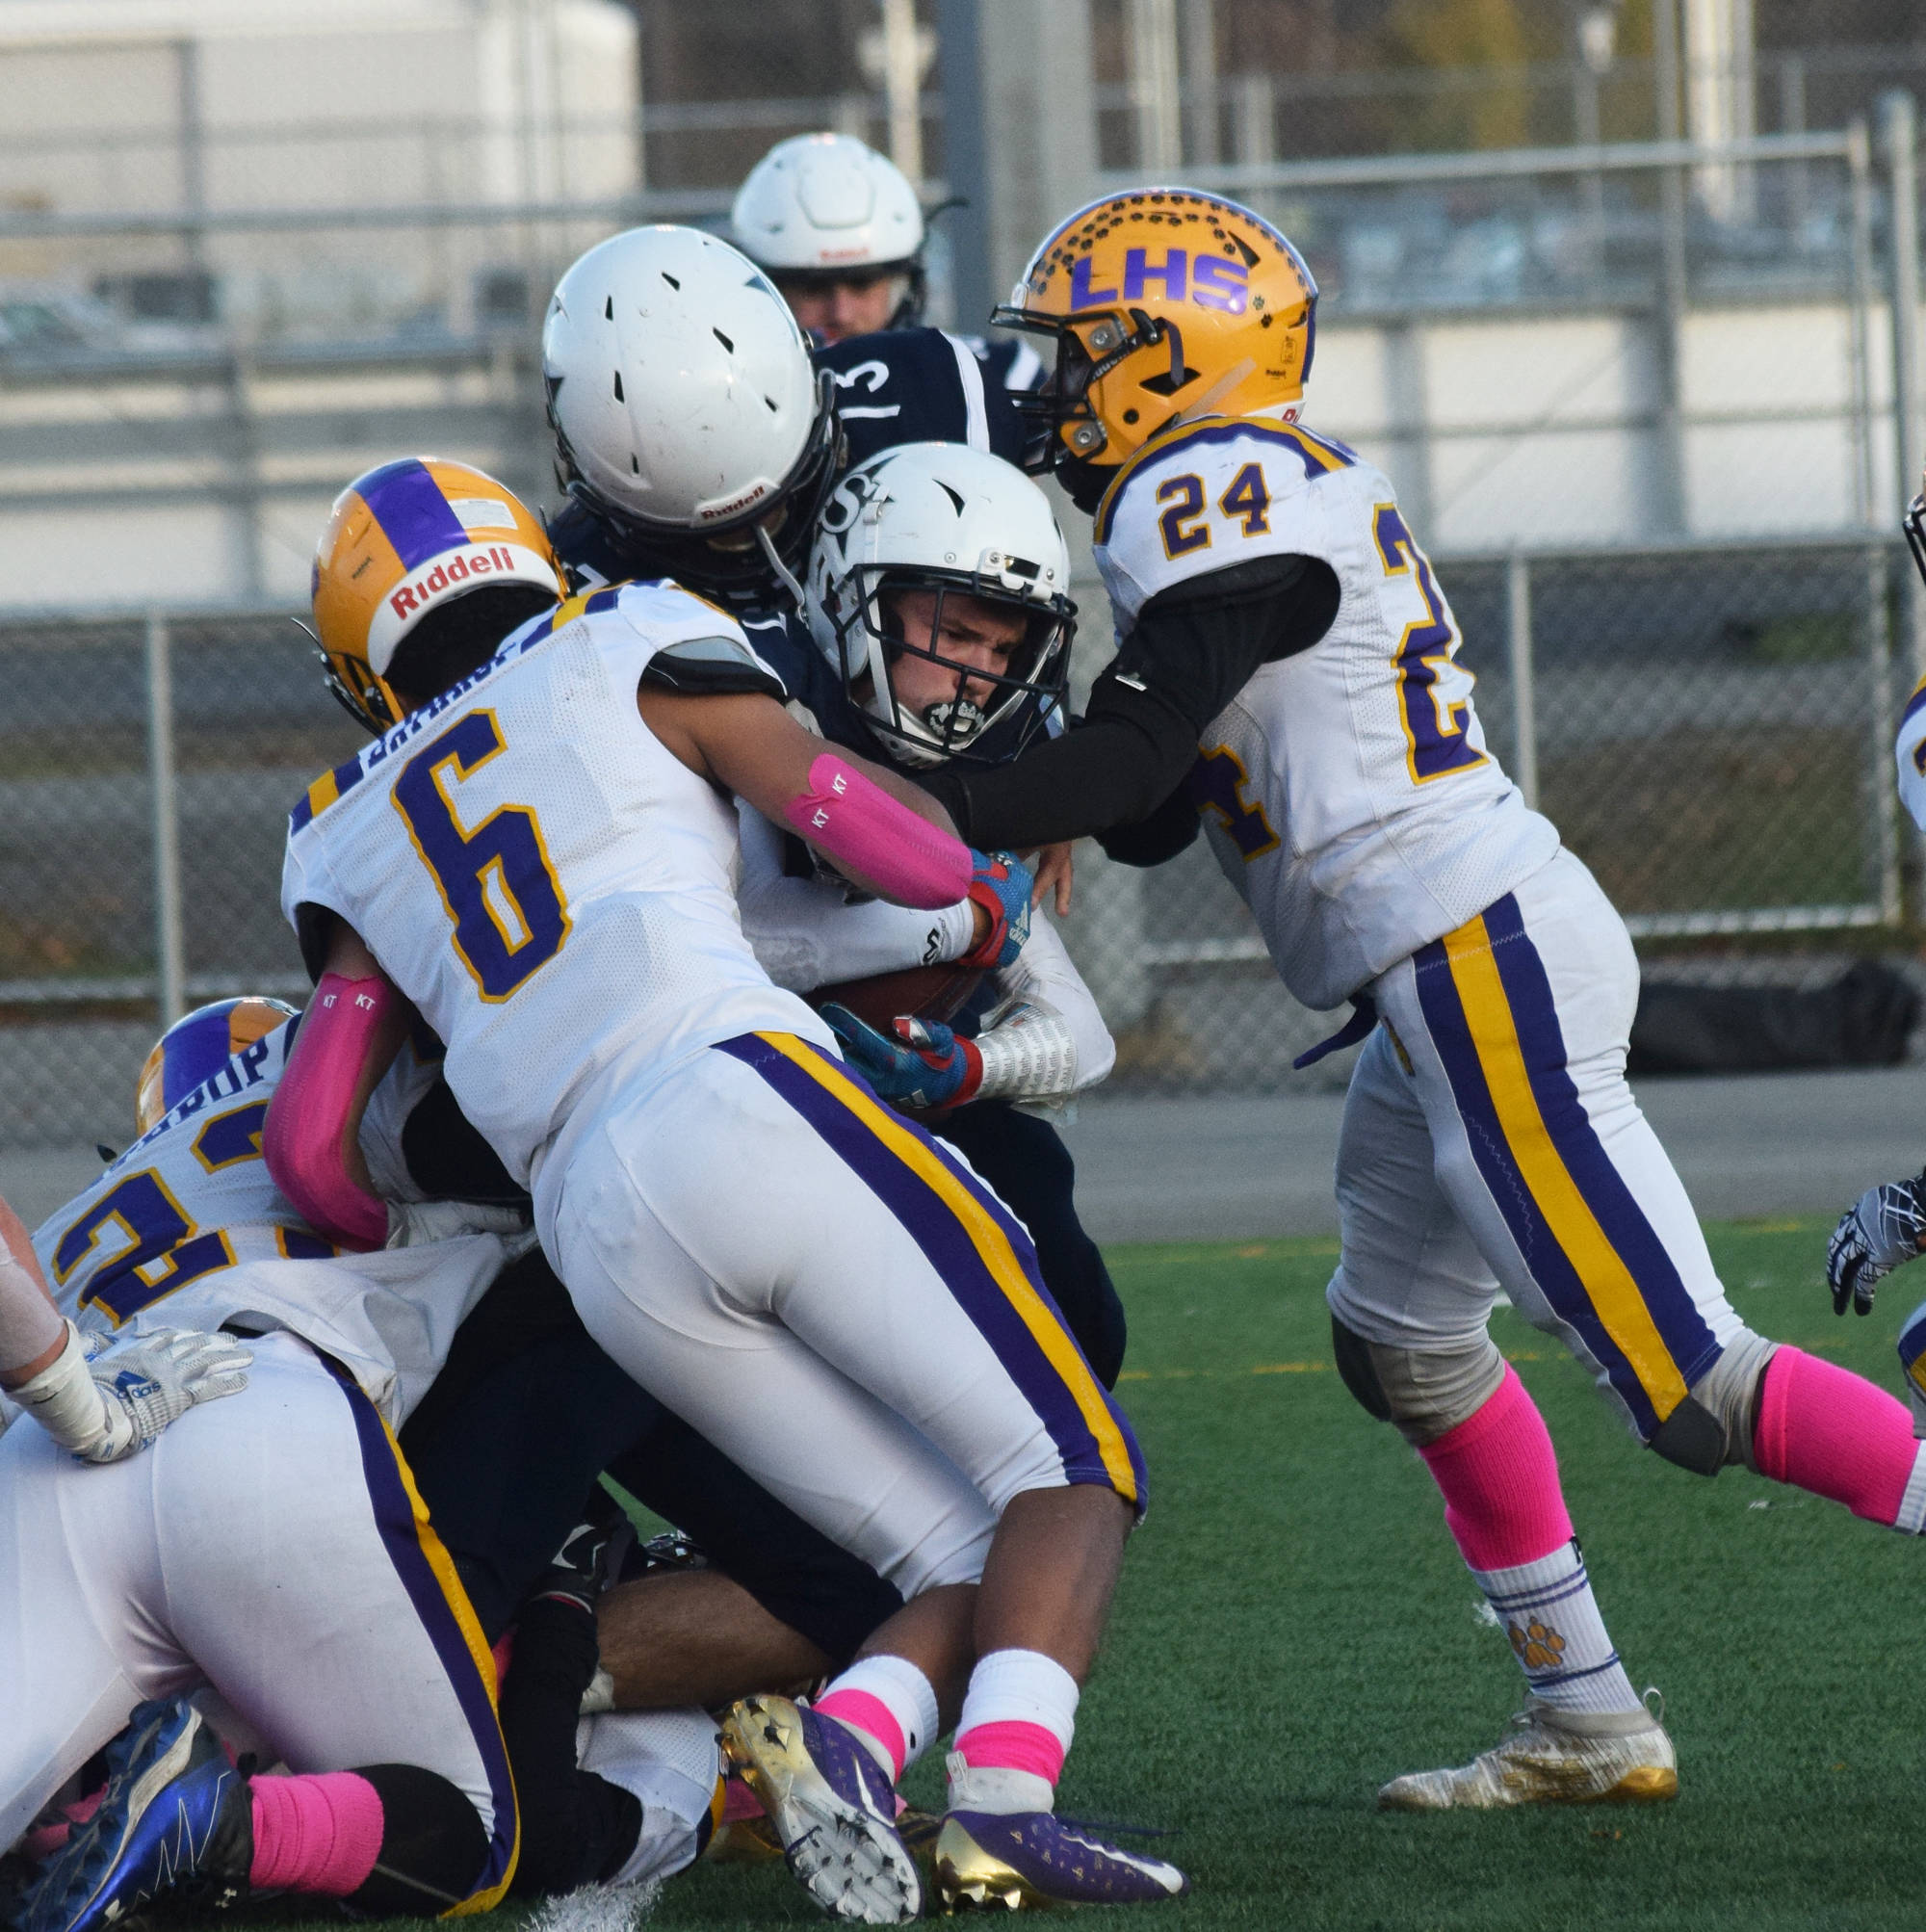 Soldotna’s Wyatt Medcoff pushes his way through a scrum of Lathrop defenders Saturday, Oct. 19, 2019, at the Div. II state football championship at Anchorage Football Stadium in Anchorage, Alaska. (Photo by Joey Klecka/Peninsula Clarion)